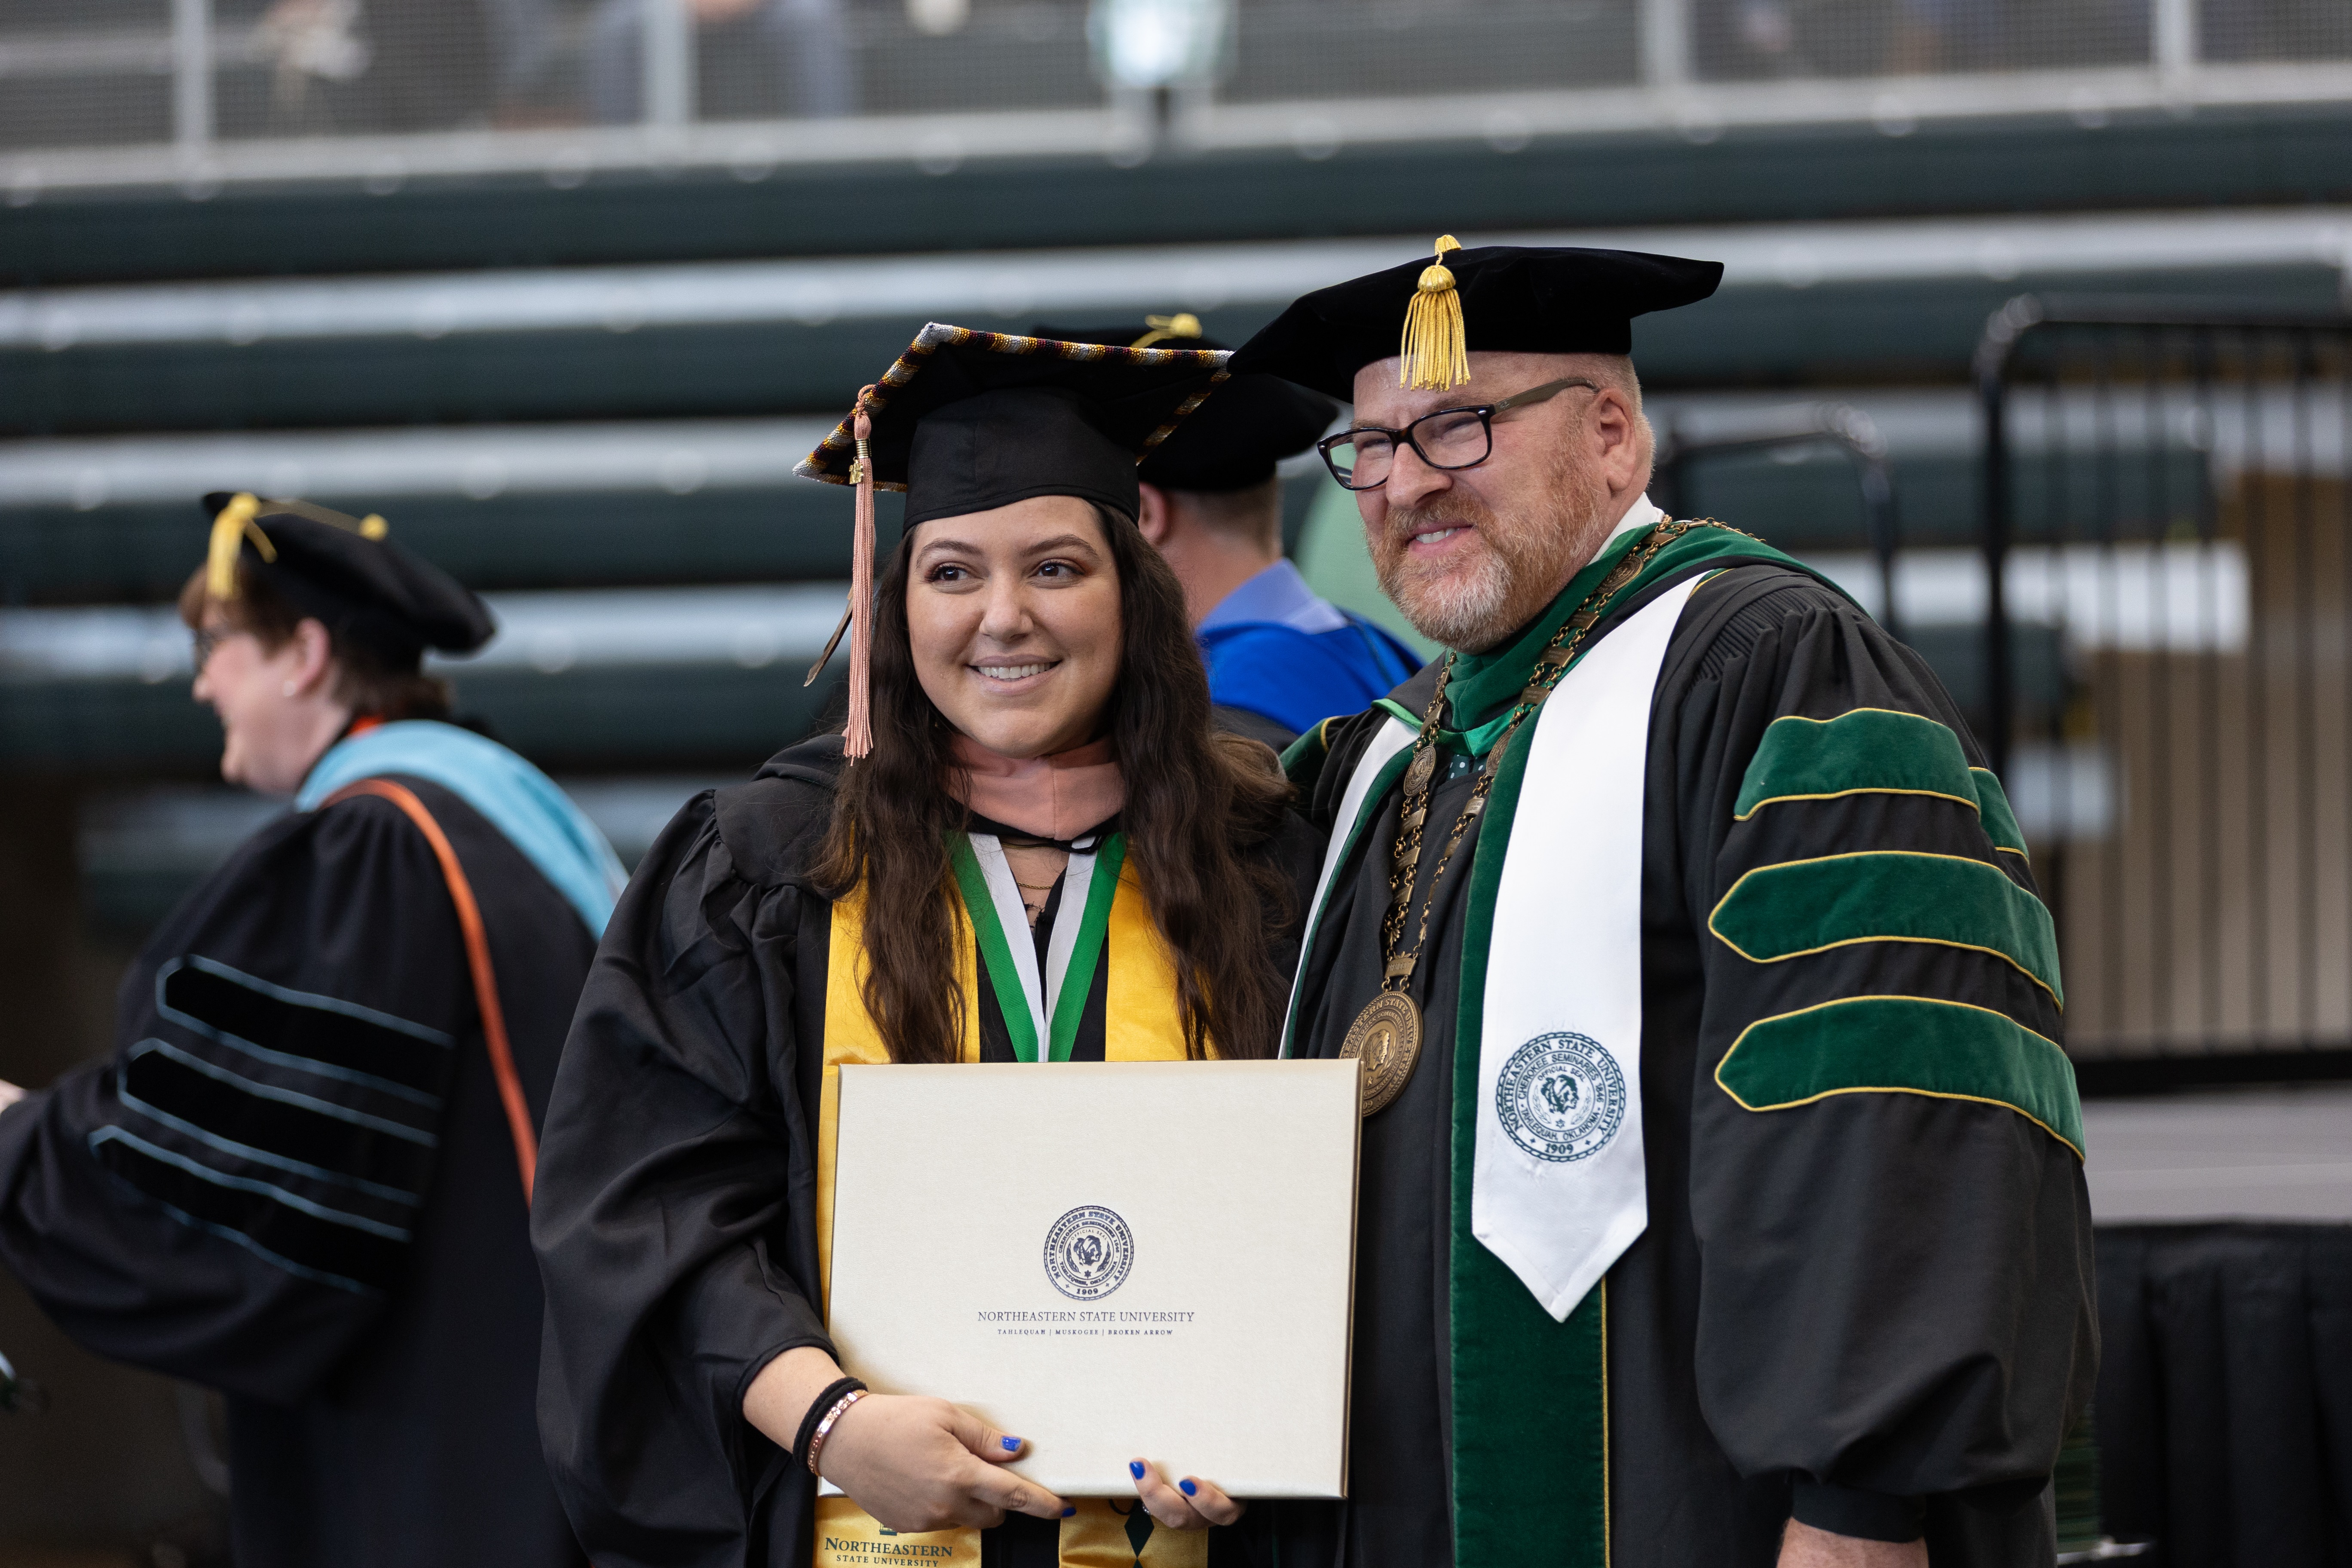 Smith-Henshaw at Commencement